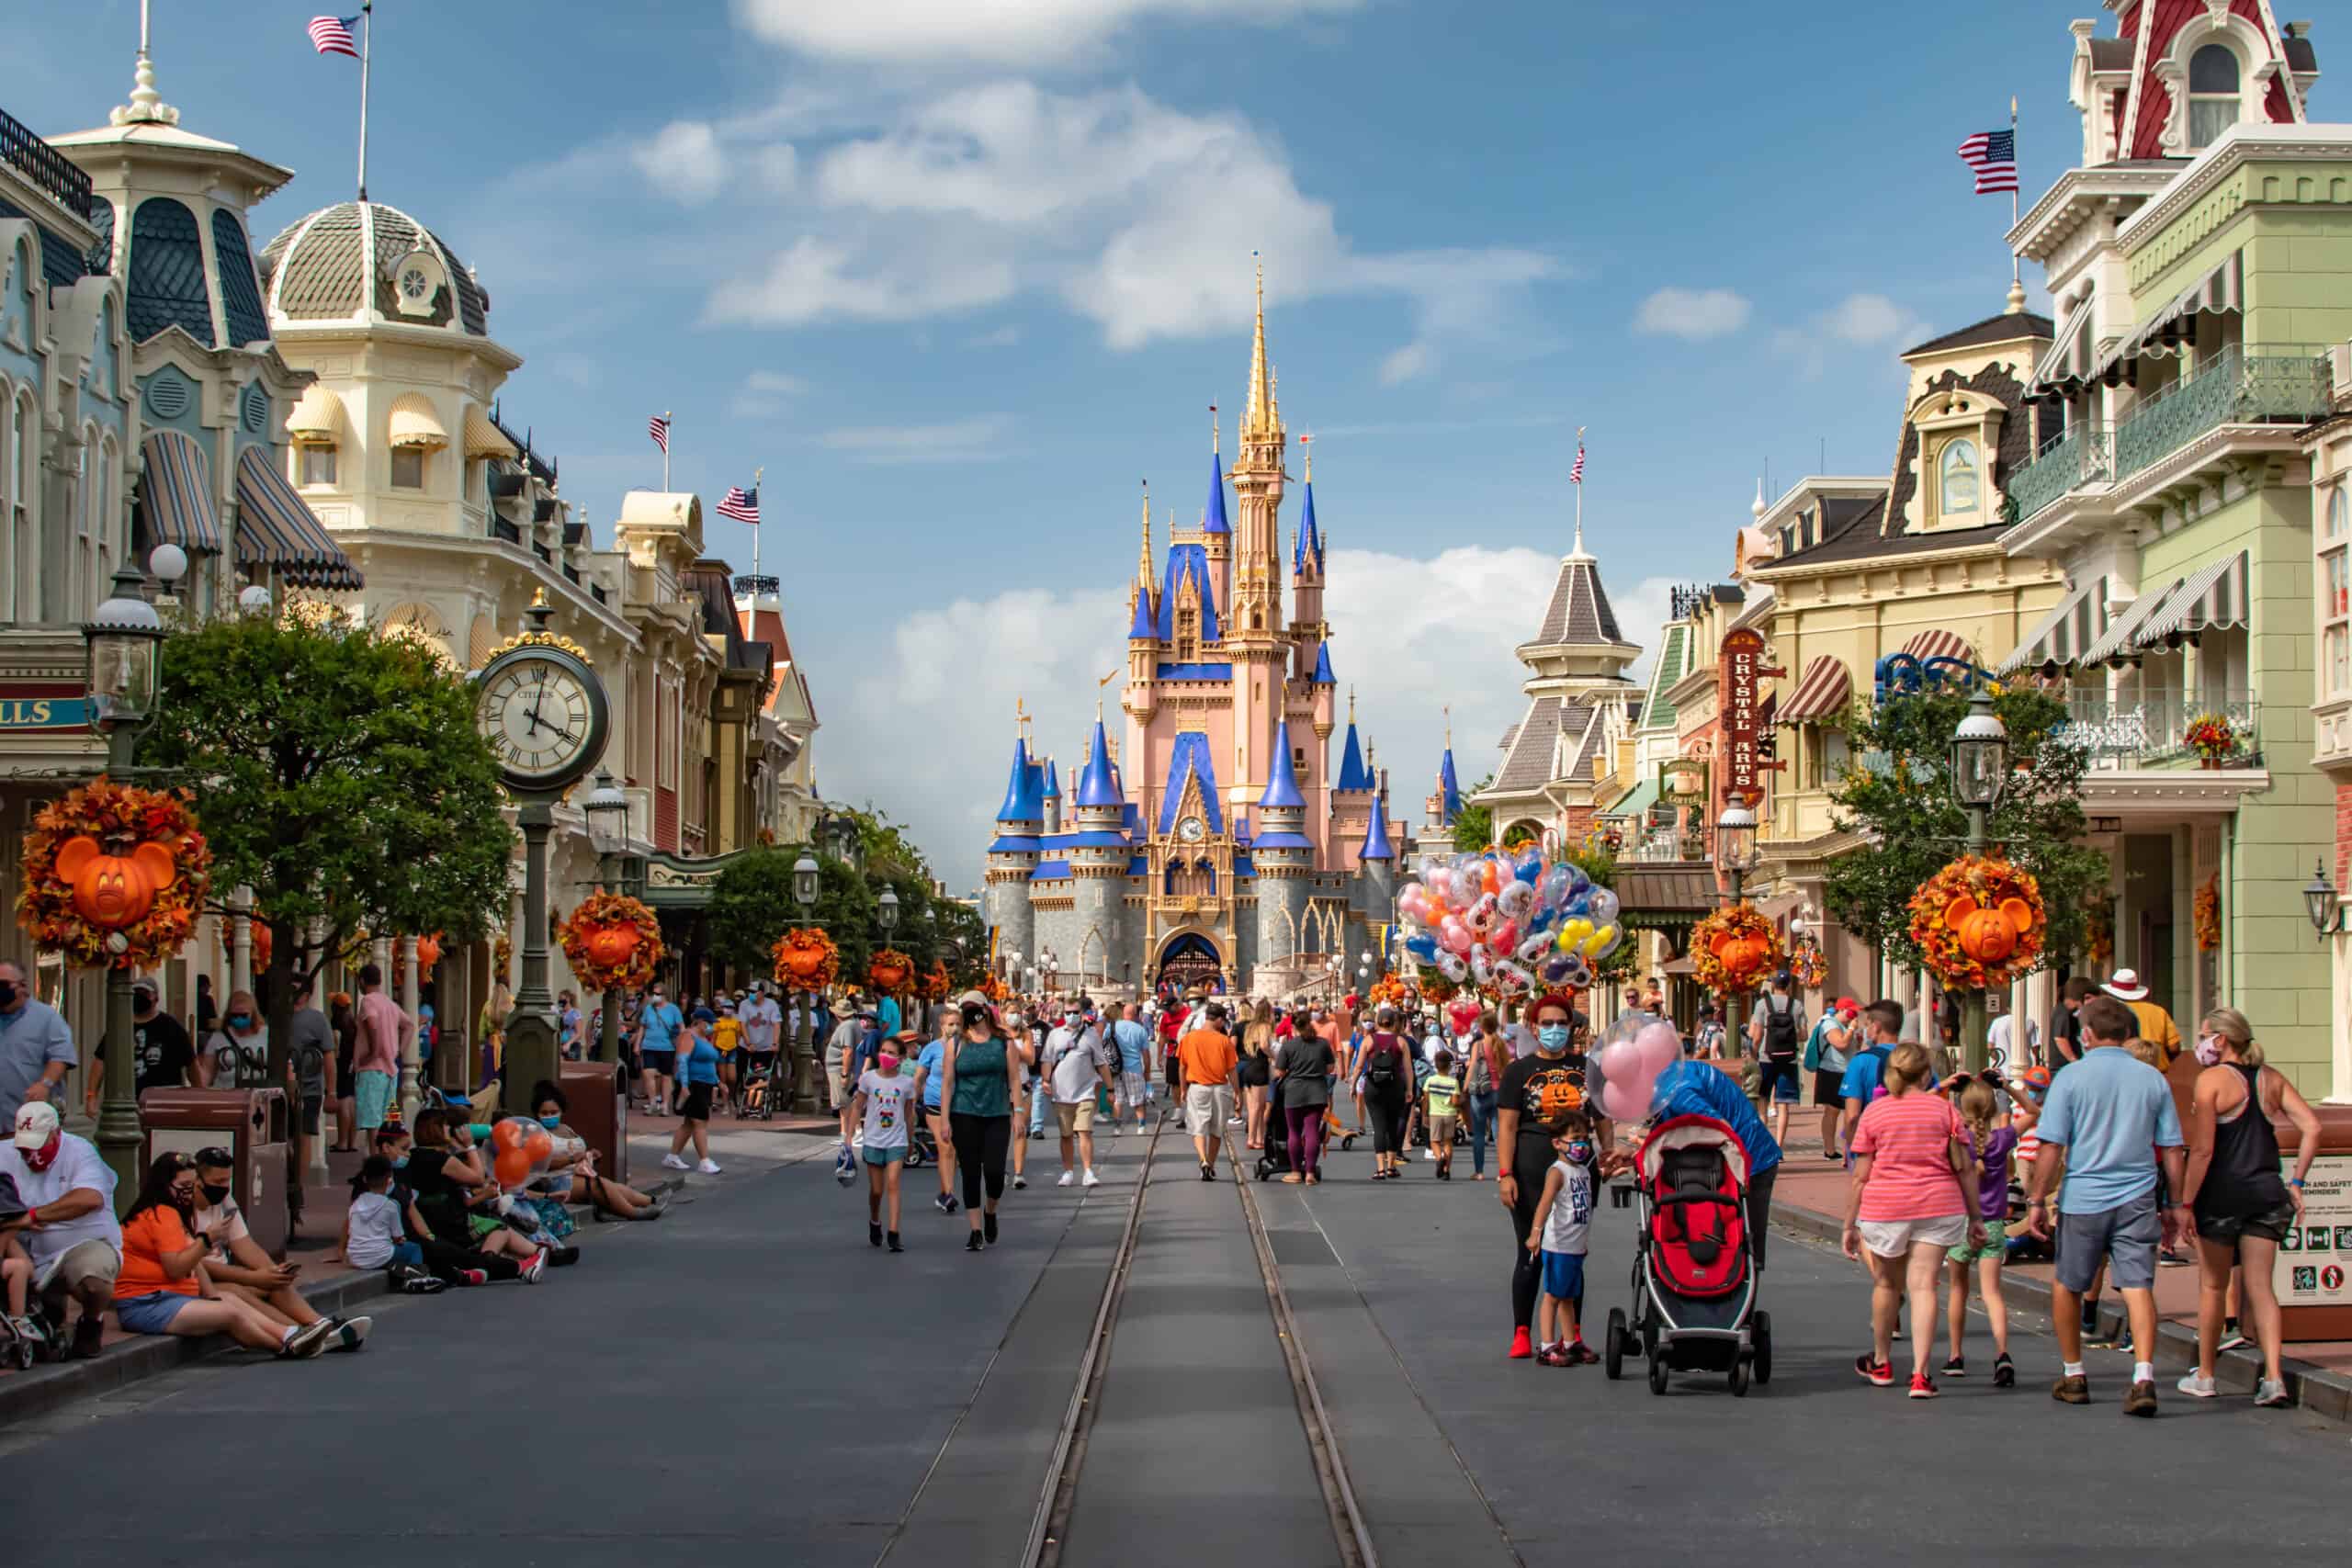 <p>What happens when Americans visit a Disney theme park and take 20,000 steps or more daily in hot, humid weather? Many get the Disney rash.</p> <p>If you’re planning on visiting Disney or any other theme park in a warm climate, here’s what you can do to prevent it and what items you should bring to treat it.</p>